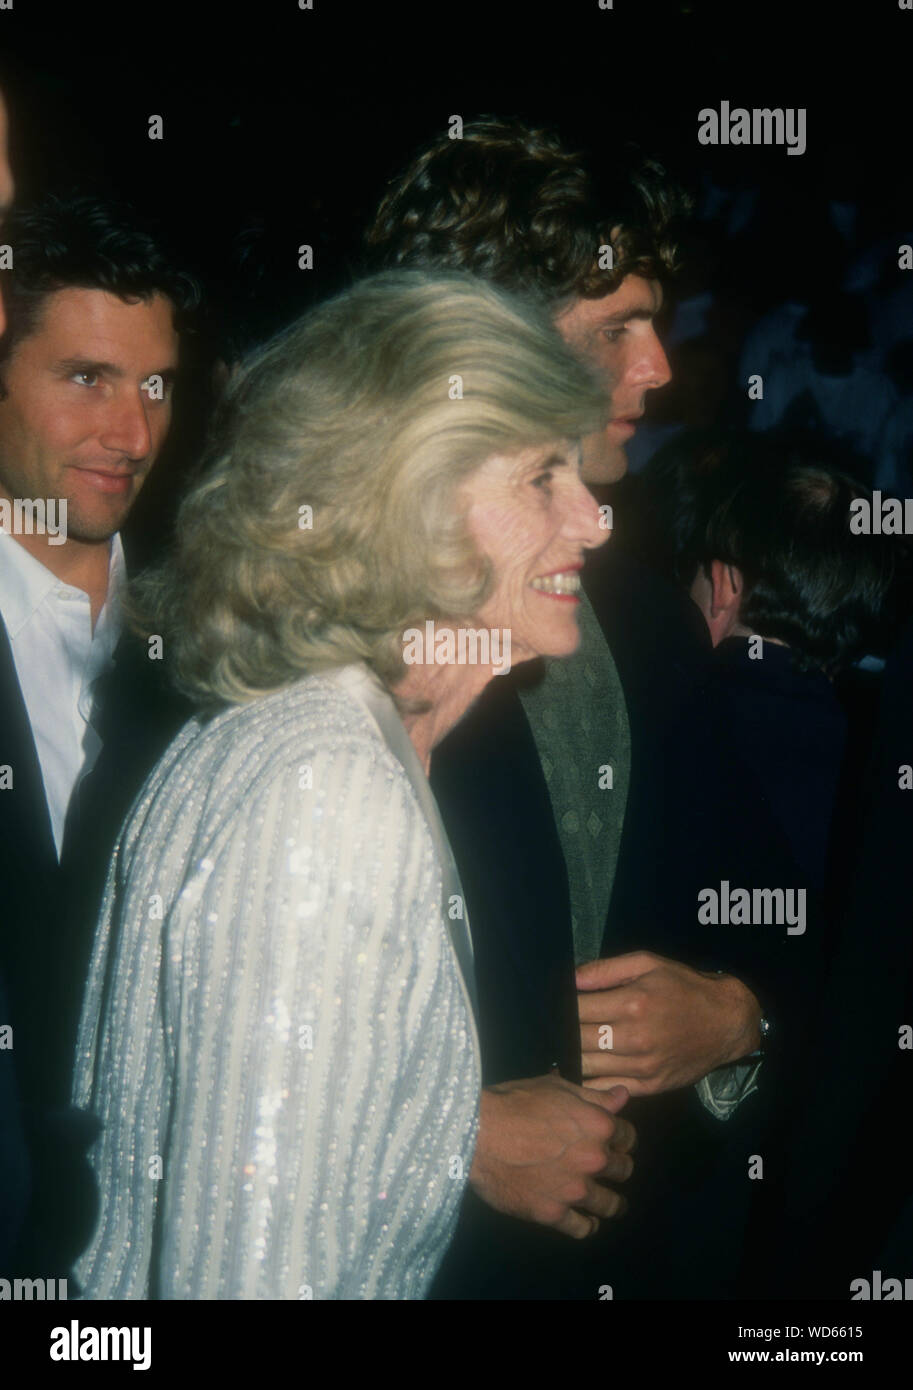 Universal City, California, USA 14th November 1994 Eunice Shriver and Anthony Shriver attend Universal Pictures' 'Junior' Premiere on November 14, 1994 at Cineplex Odeon Universal City Cinemas in Universal City, California, USA. Photo by Barry King/Alamy Stock Photo Stock Photo